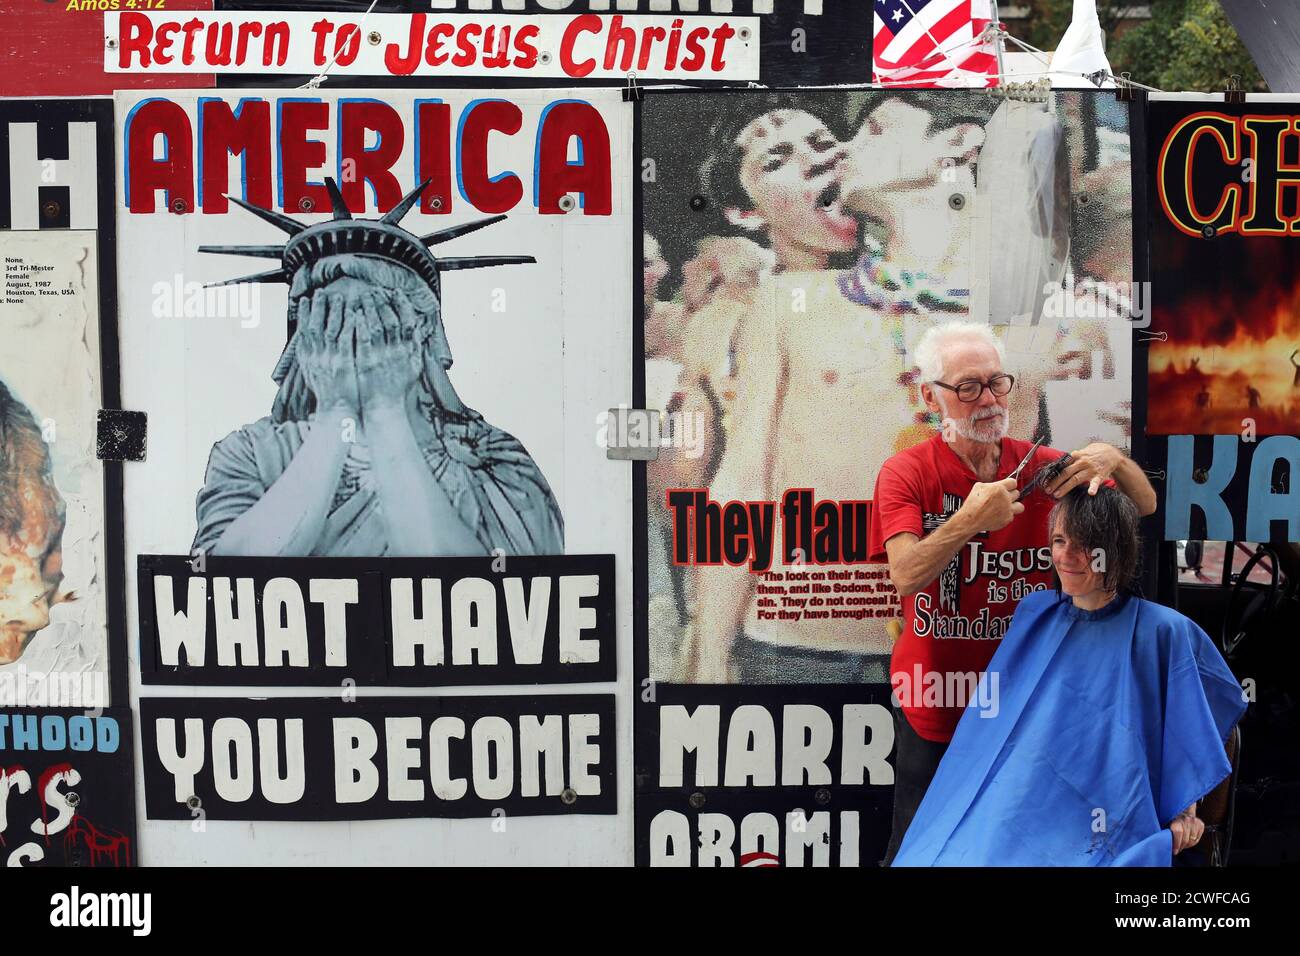 Ron Brock cuts Jeanne Kee's hair in front of his truck, covered in anti-abortion posters, outside of the Republican National Convention in Tampa, Florida on August 29, 2012.  REUTERS/Philip Andrews  (UNITED STATES - Tags: POLITICS ELECTIONS CIVIL UNREST TPX IMAGES OF THE DAY) Stock Photo